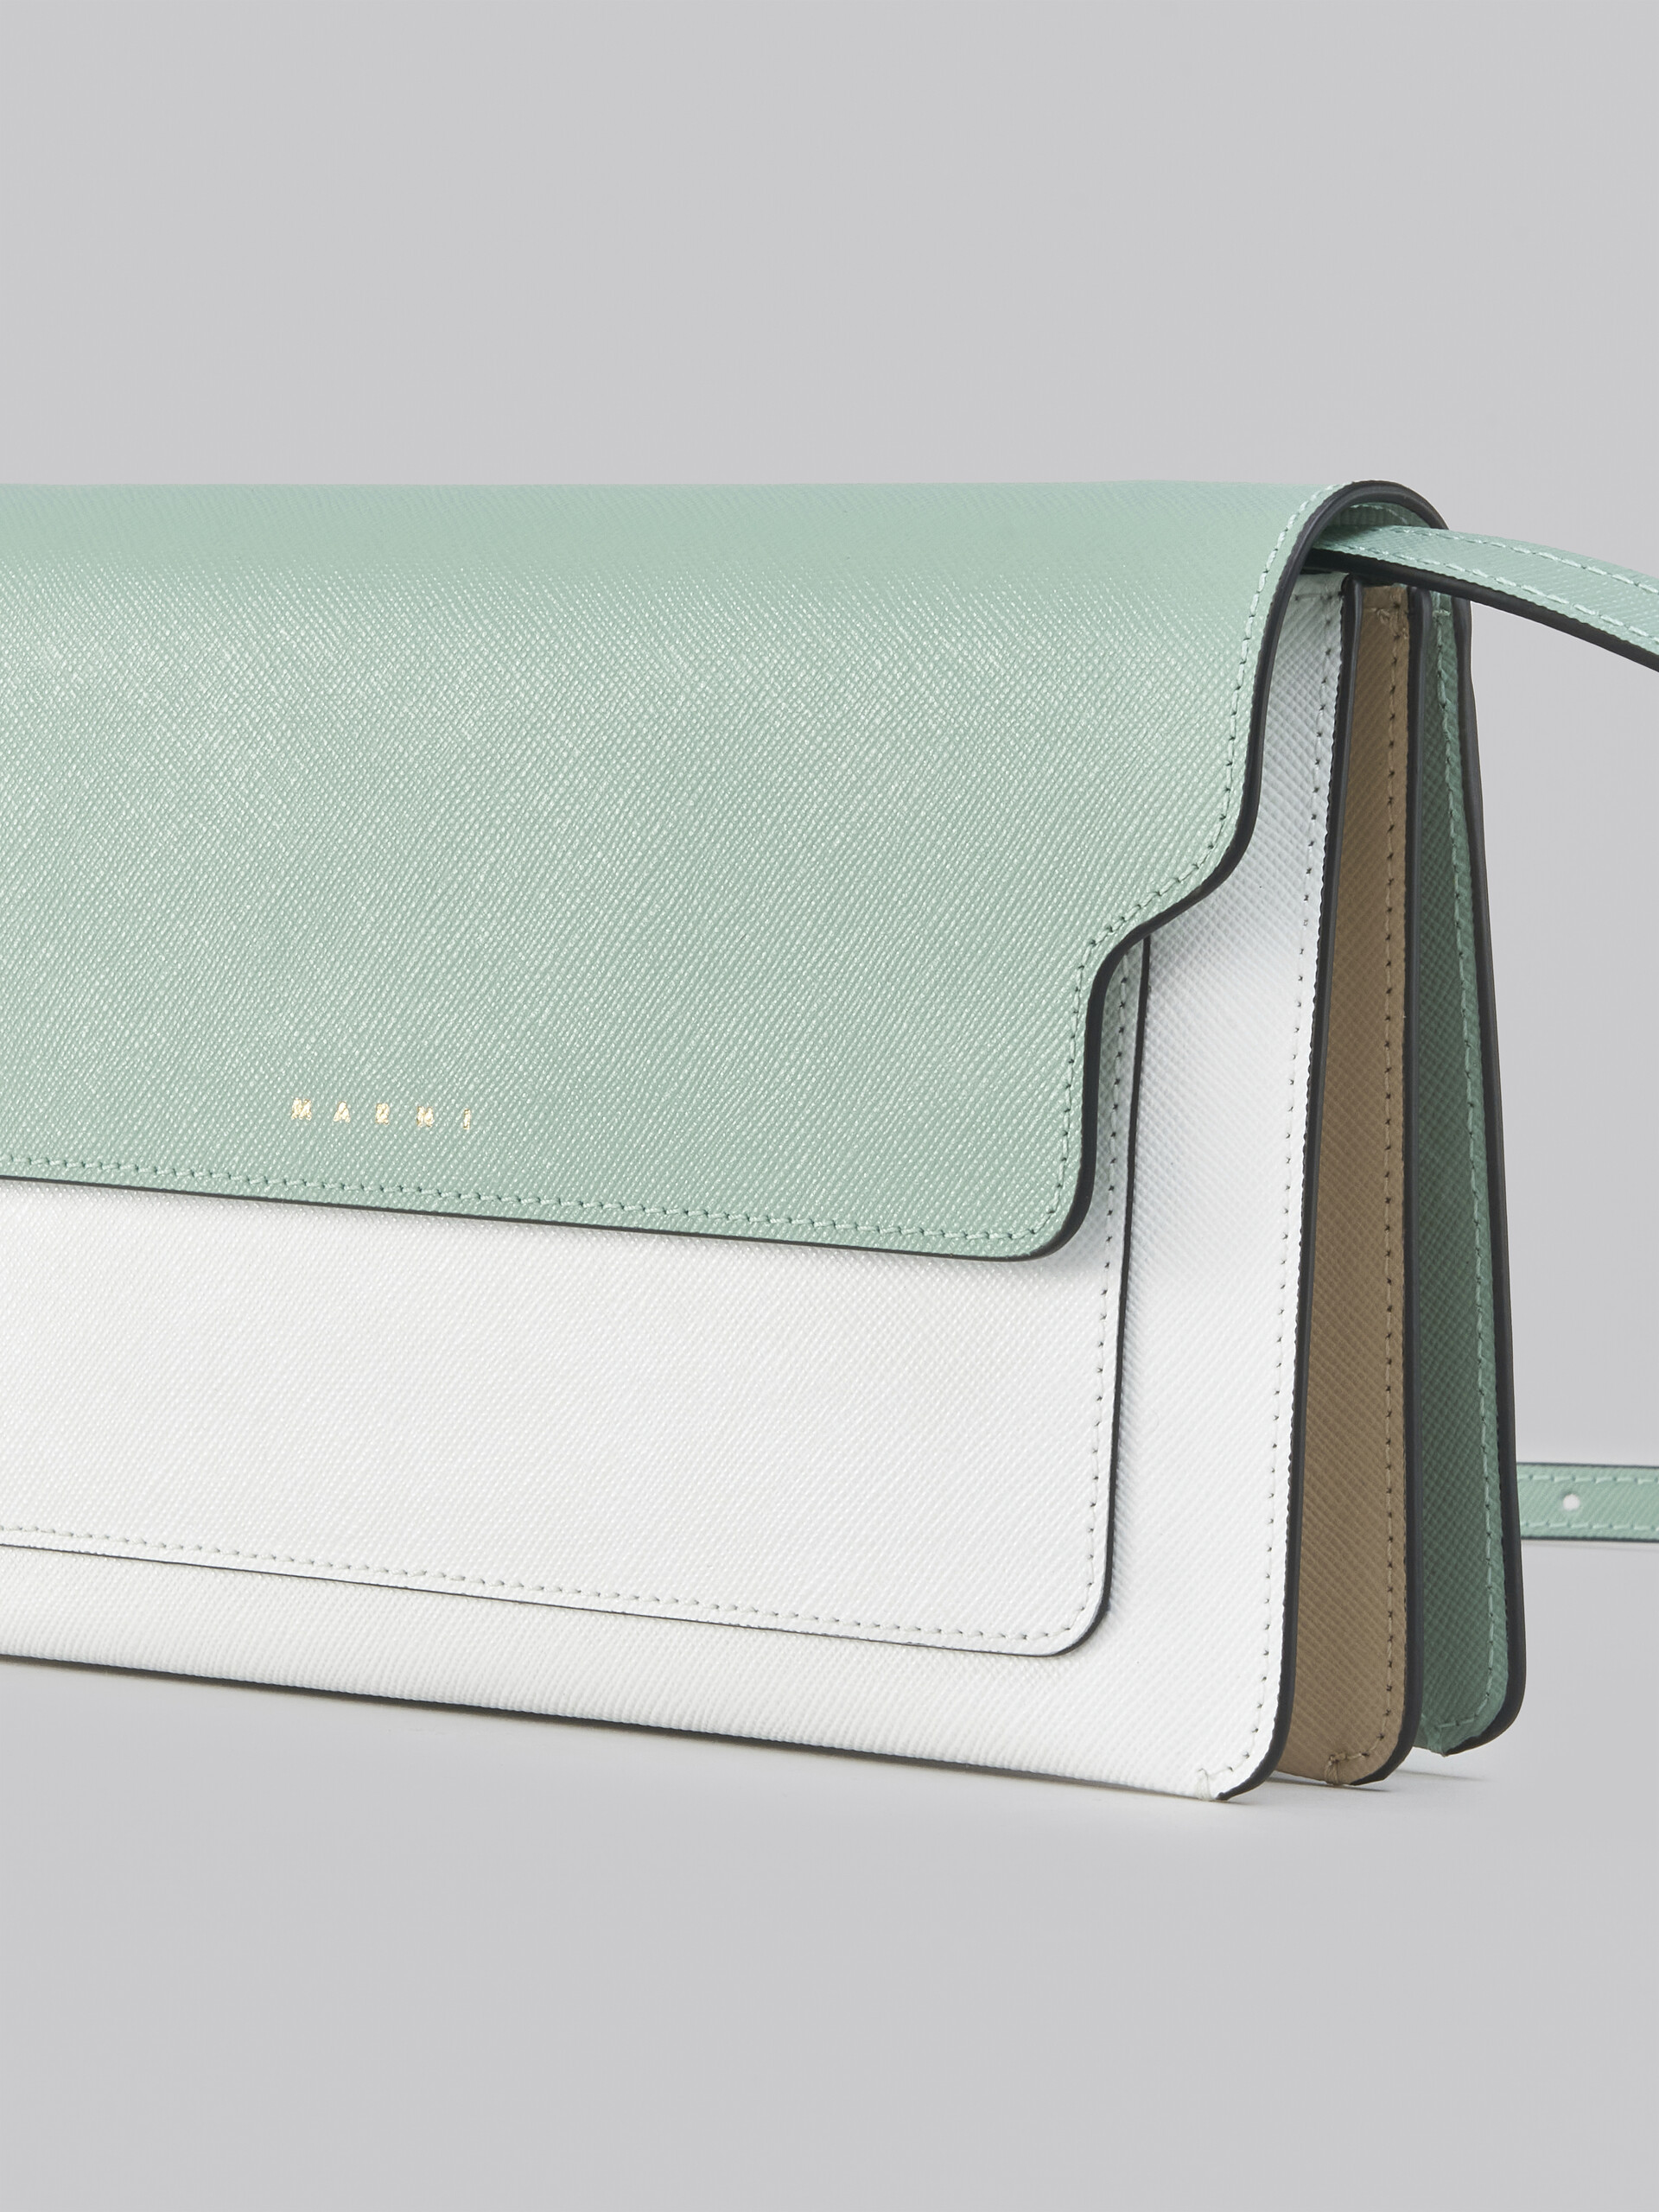 Trunk Clutch in light green white and brown saffiano leather - Pochette - Image 4